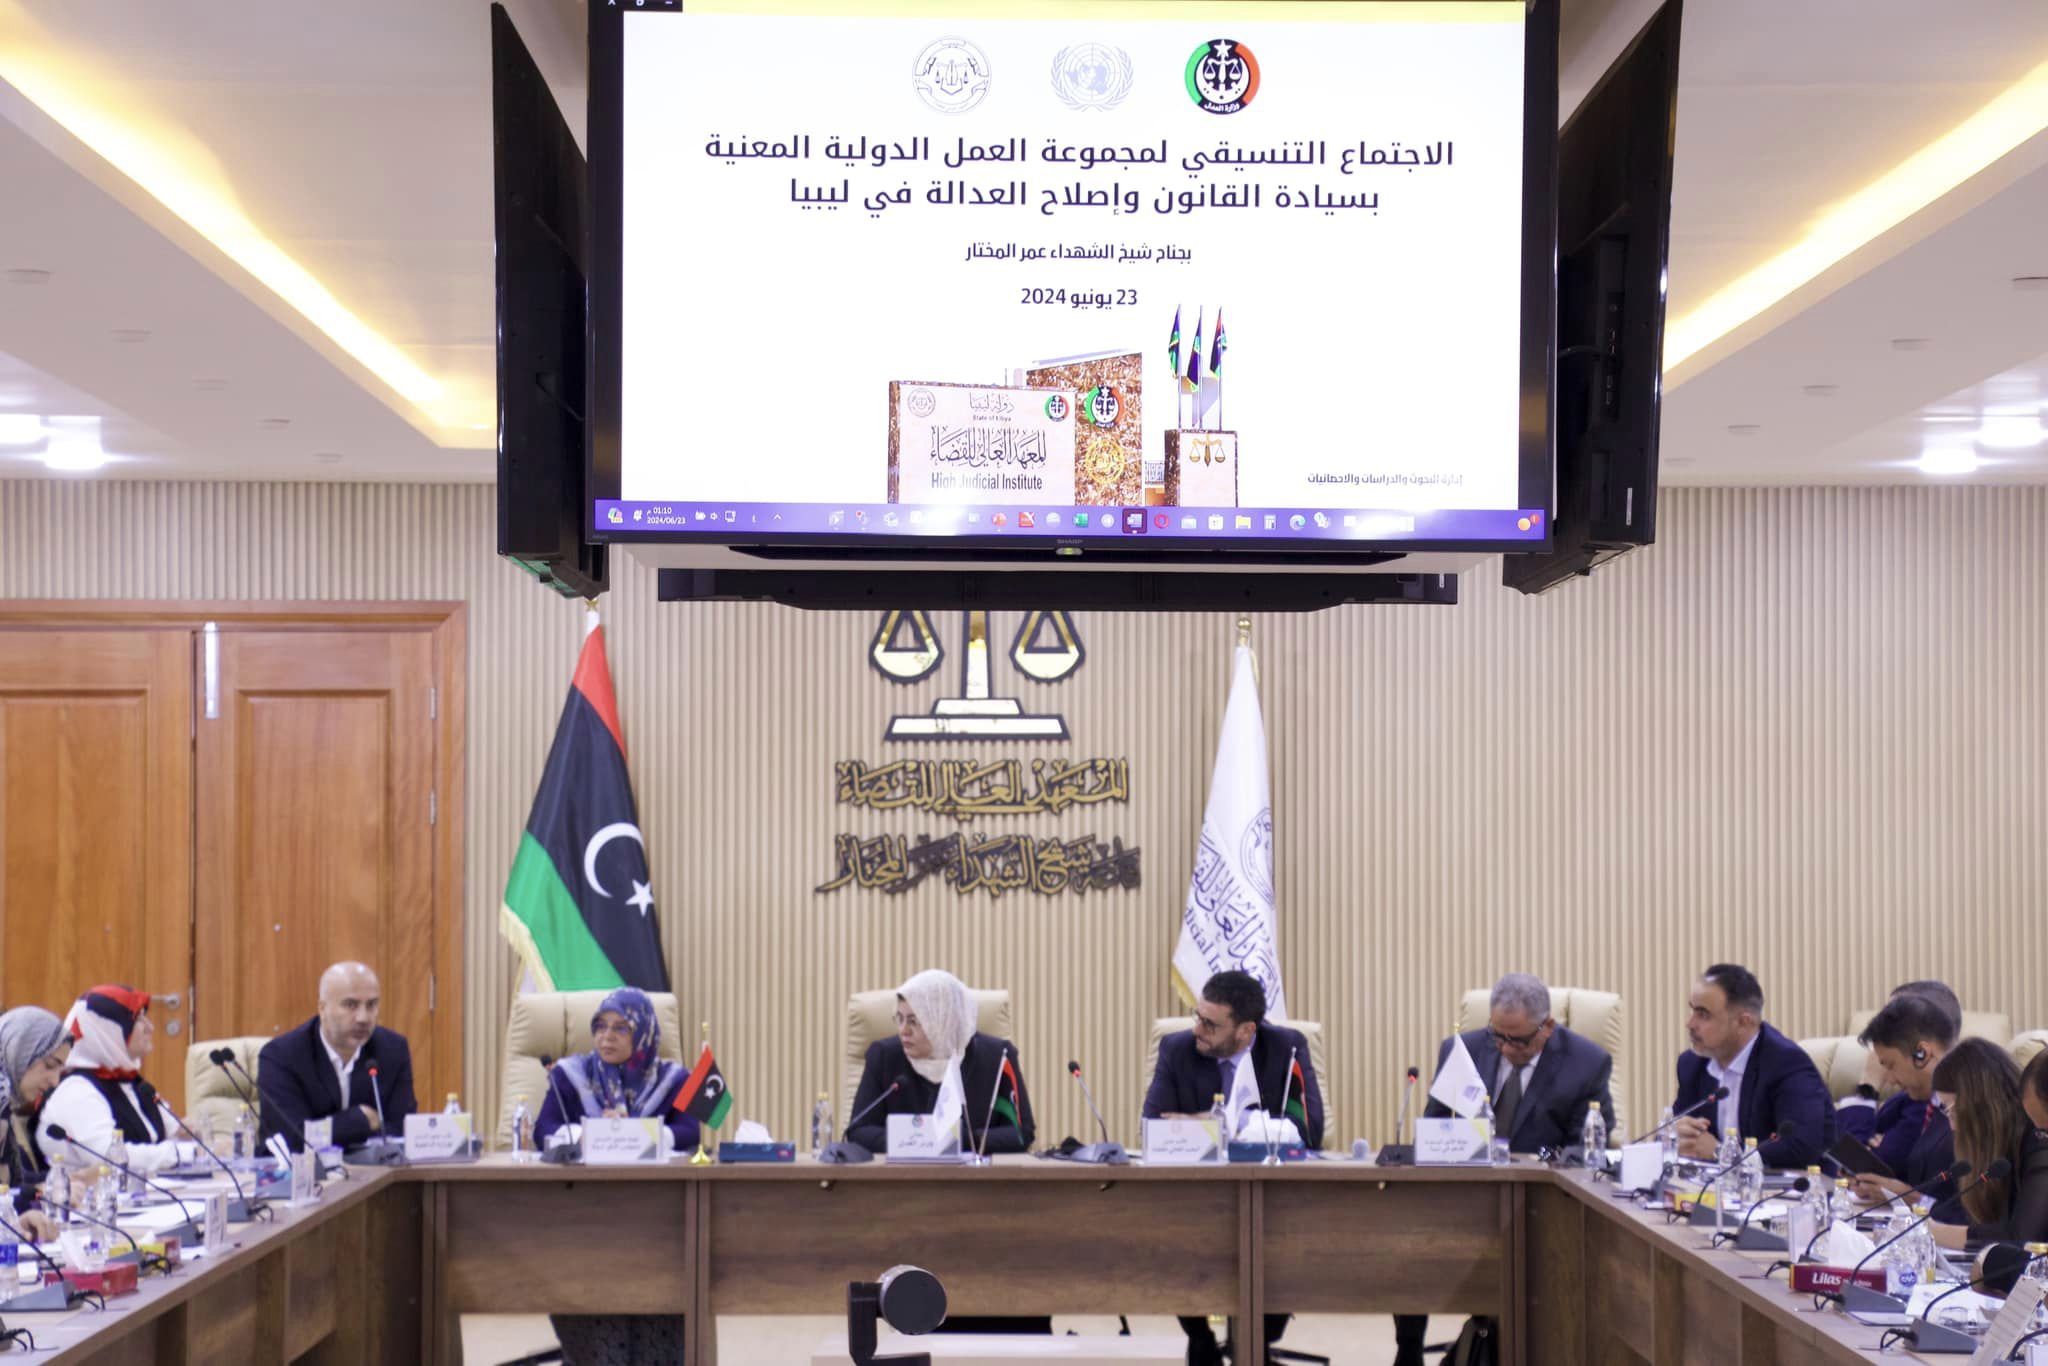 High Judicial Institute hosts the first meeting of the international working group on the rule of law and justice reform in Libya.